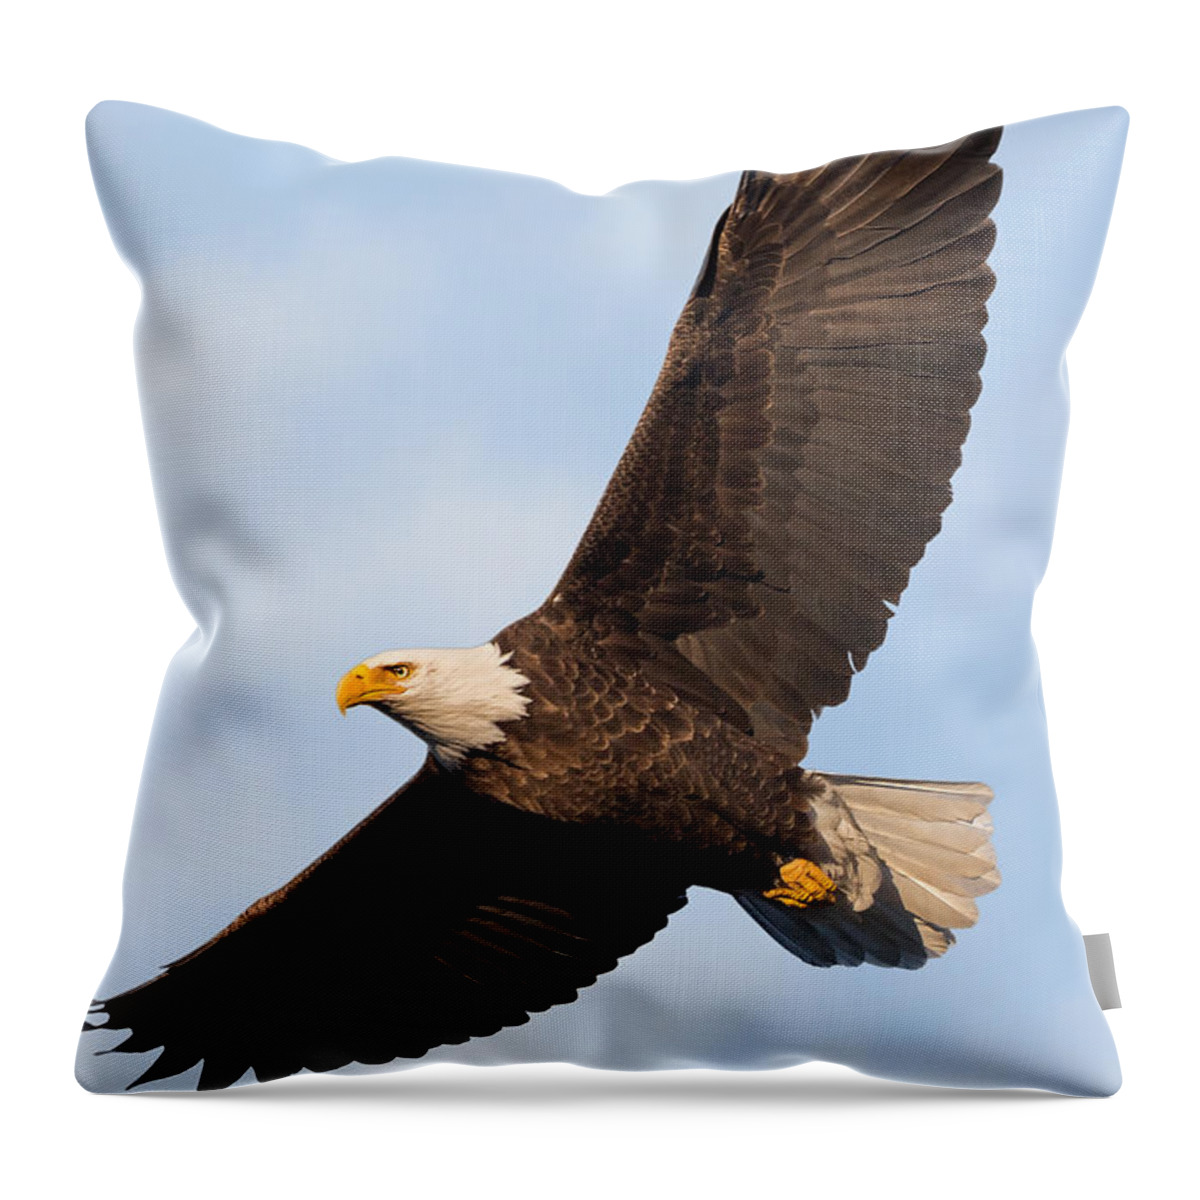 Eagle Throw Pillow featuring the photograph Soaring American Bald Eagle by Bill Wakeley